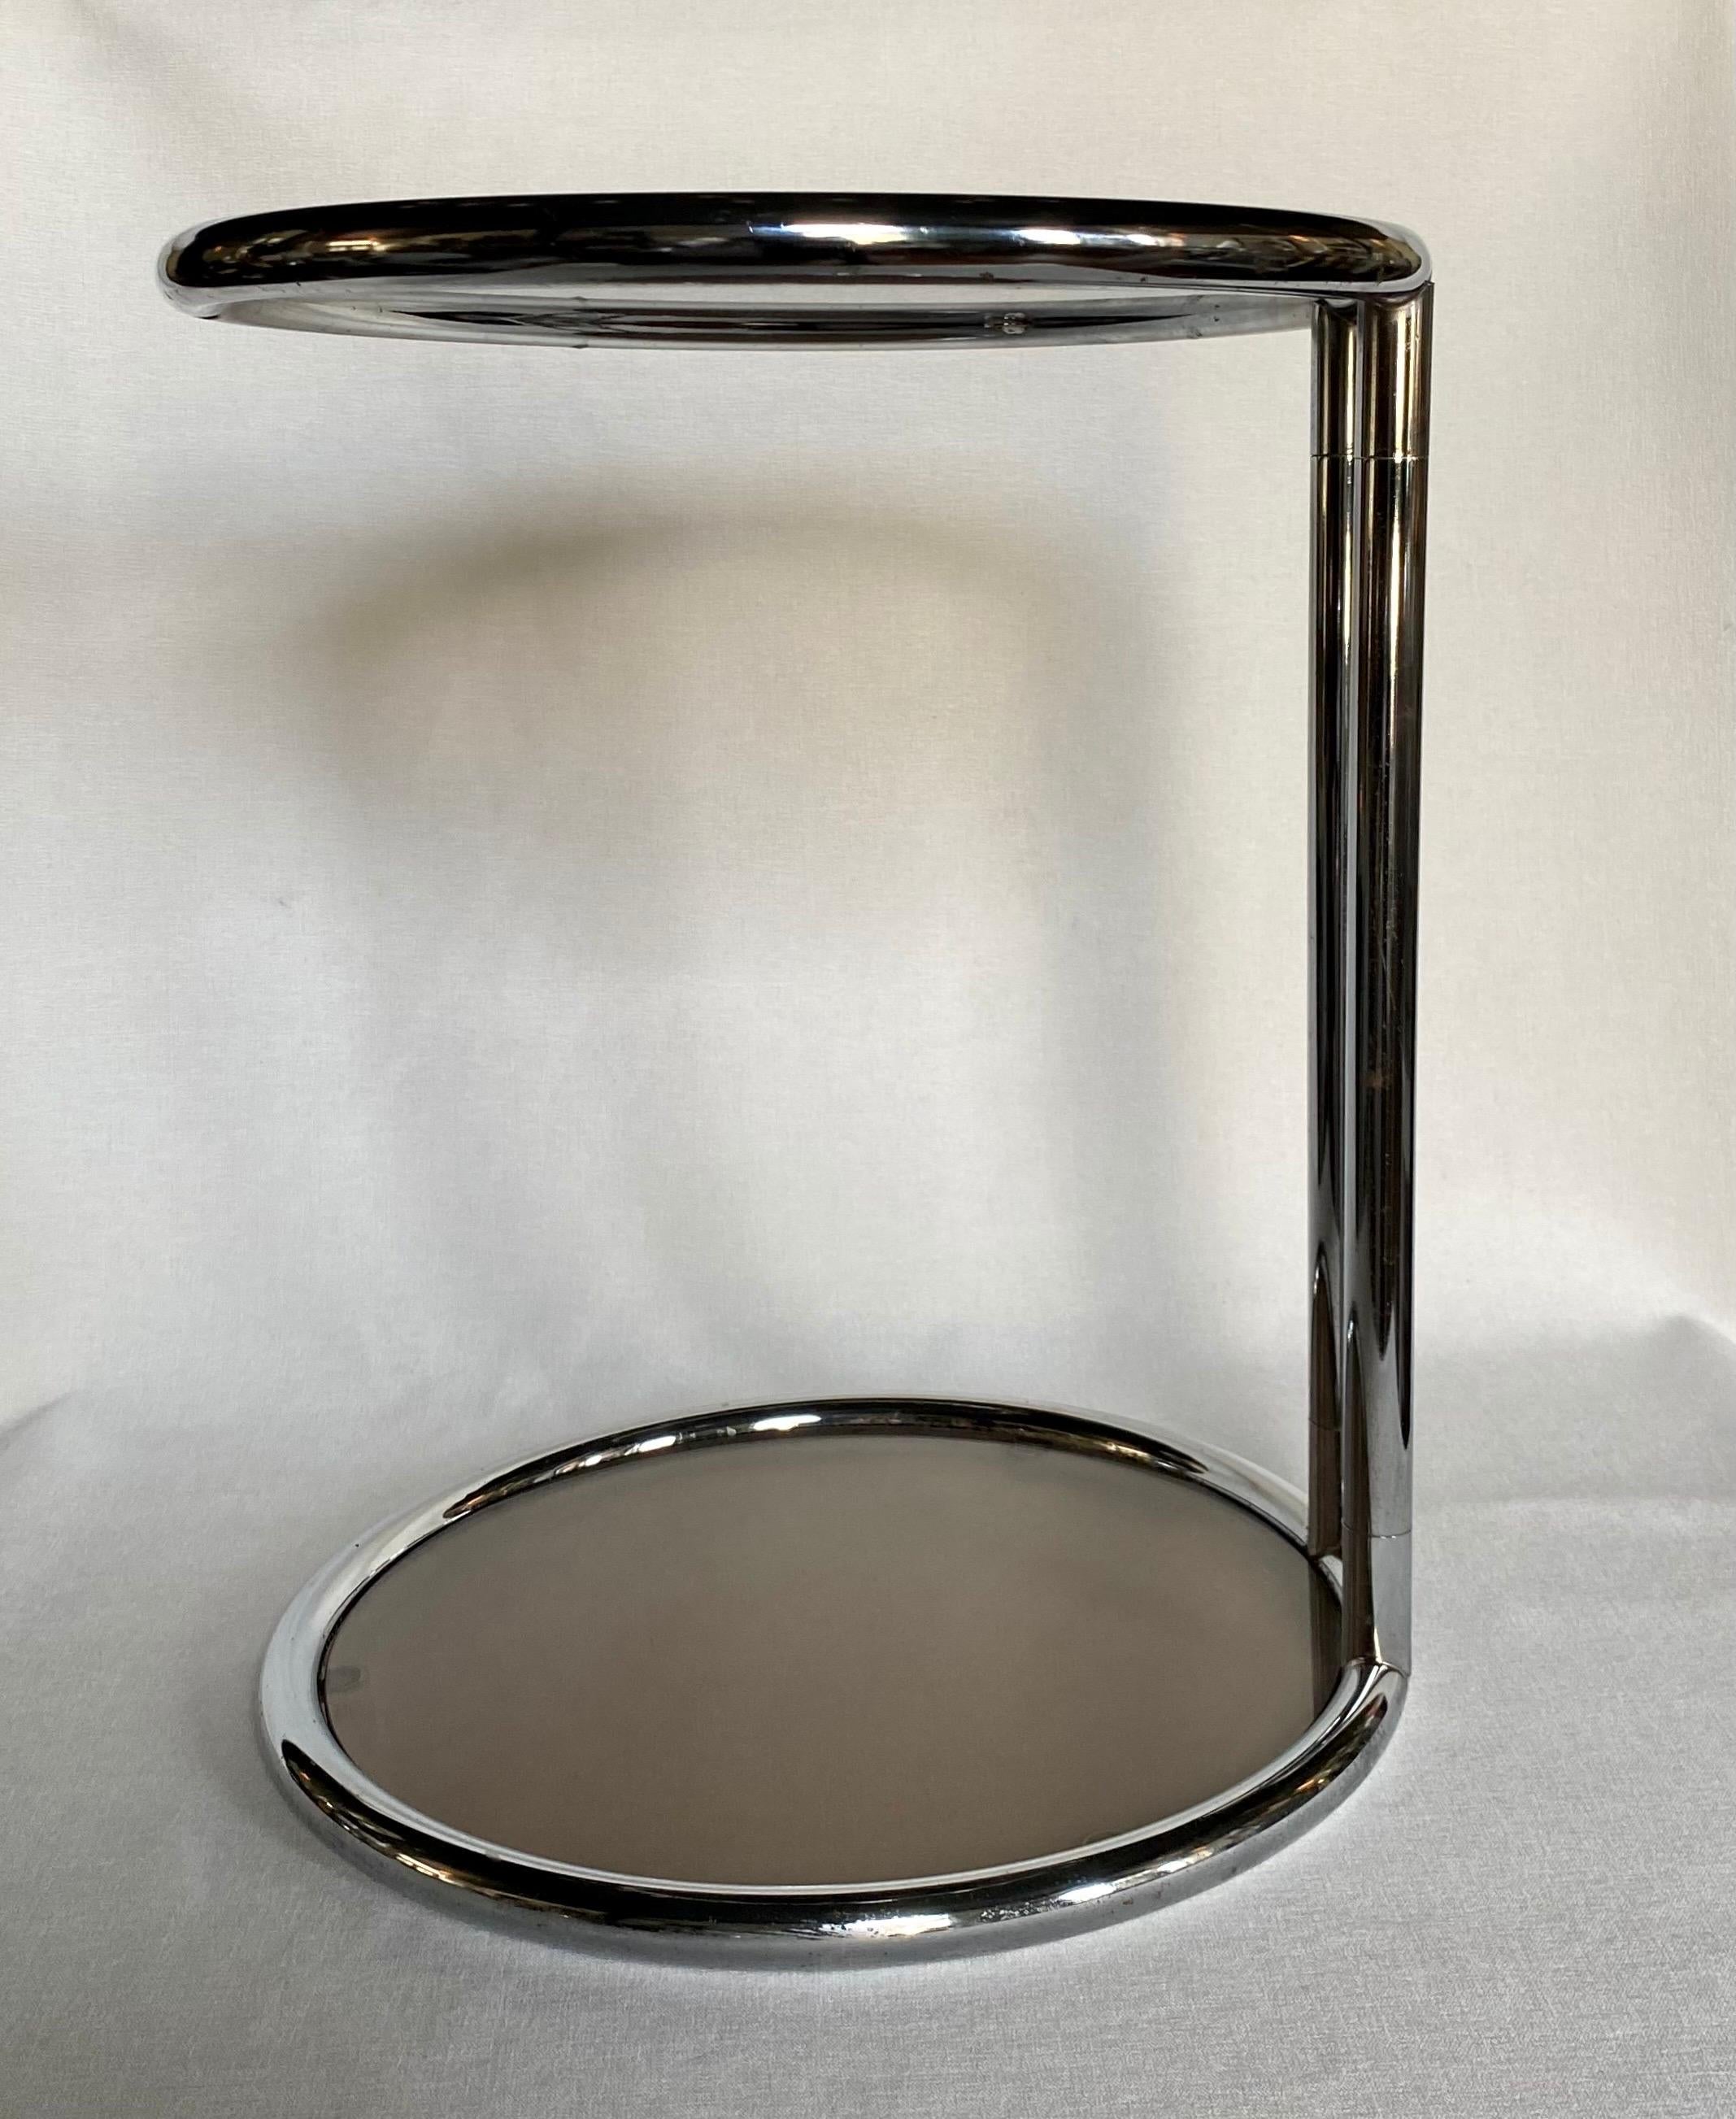 Anodized Mid Century Modern Round Chrome & Glass Drinks Table in the Style of Eileen Gray